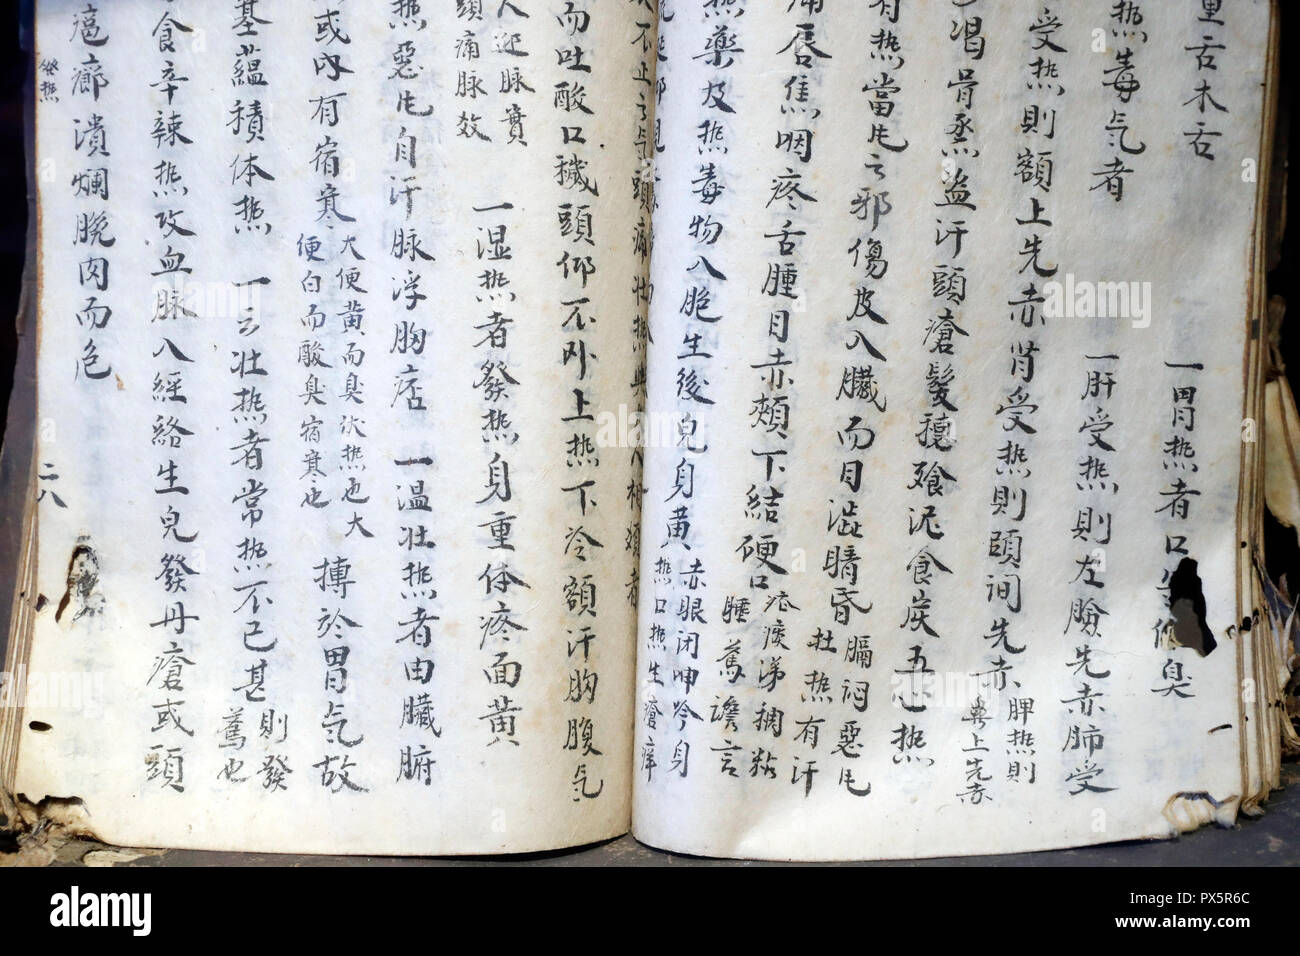 Museum of Traditional Vietnamese Medicine.  Old oriental medicine book in chinese.  Ho Chi Minh City. Vietnam. Stock Photo